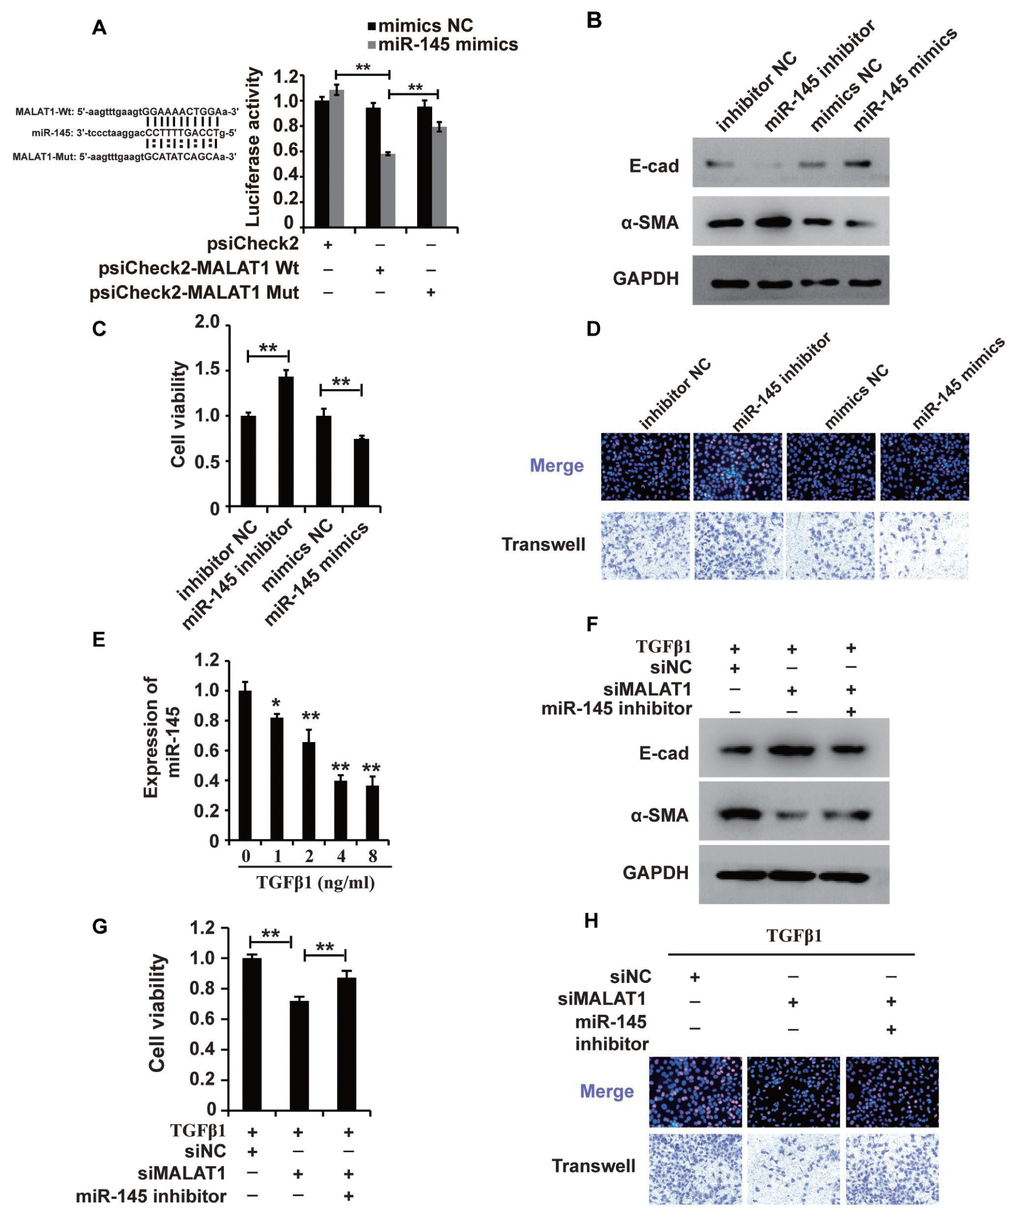 MALAT1 acts as a miR-145 sponge in HK2 cells treated with TGF-β1. (A) Luciferase reporter analysis of the binding between miR-145 and predicted MALAT1 binding sites. (B) Western blot analyses of E-cad, α-SMA and GAPDH expression in HK2 cells transfected with miR-145 mimics, miR-145 inhibitors and their control RNAs. (C and D) CCK8, EdU and cell migration analyses of the viability, proliferation and migration of HK2 cells transfected with miR-145 mimics, miR-145 inhibitors and their control RNAs. (E) qPCR analysis of miR-145 expression in HK2 cells treated with different concentrations of TGF-β1 for 48 h. (F) Western blot analyses of E-cadherin, α-SMA and GAPDH expression in HK2 cells receiving different treatments. (G and H) CCK8, EdU and cell migration analyses of the viability, proliferation and migration of HK2 cells receiving different treatments. GAPDH and U6 were used as controls. *P P 